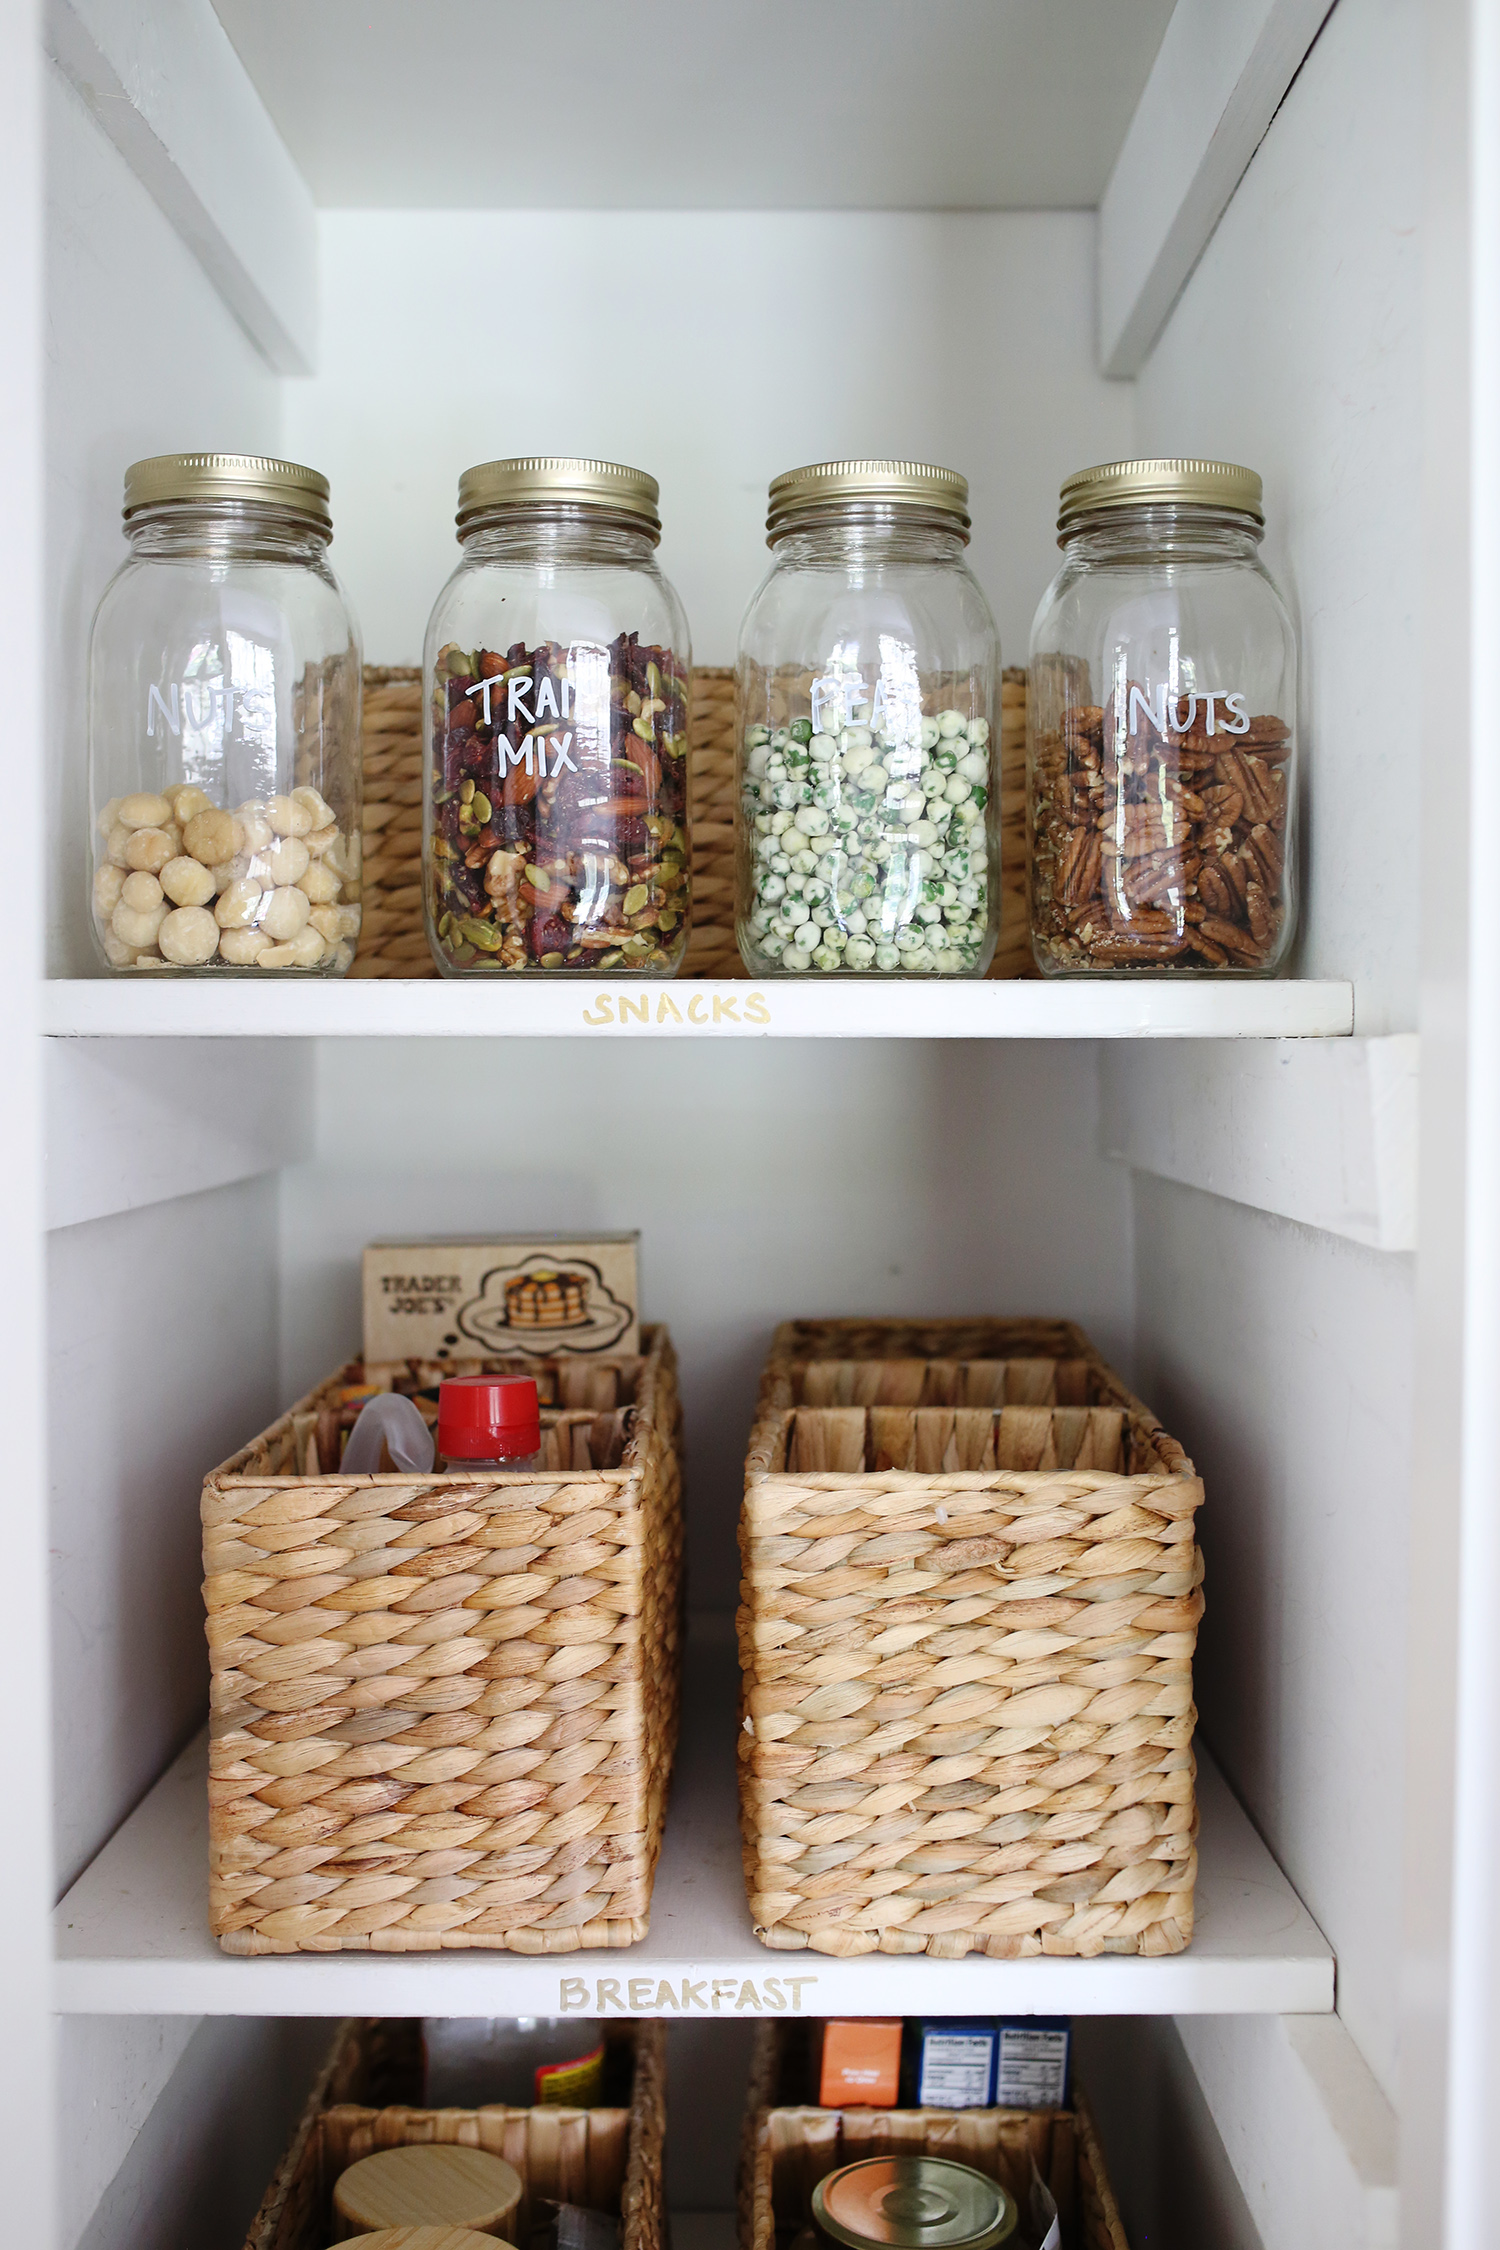 Inside the pantry